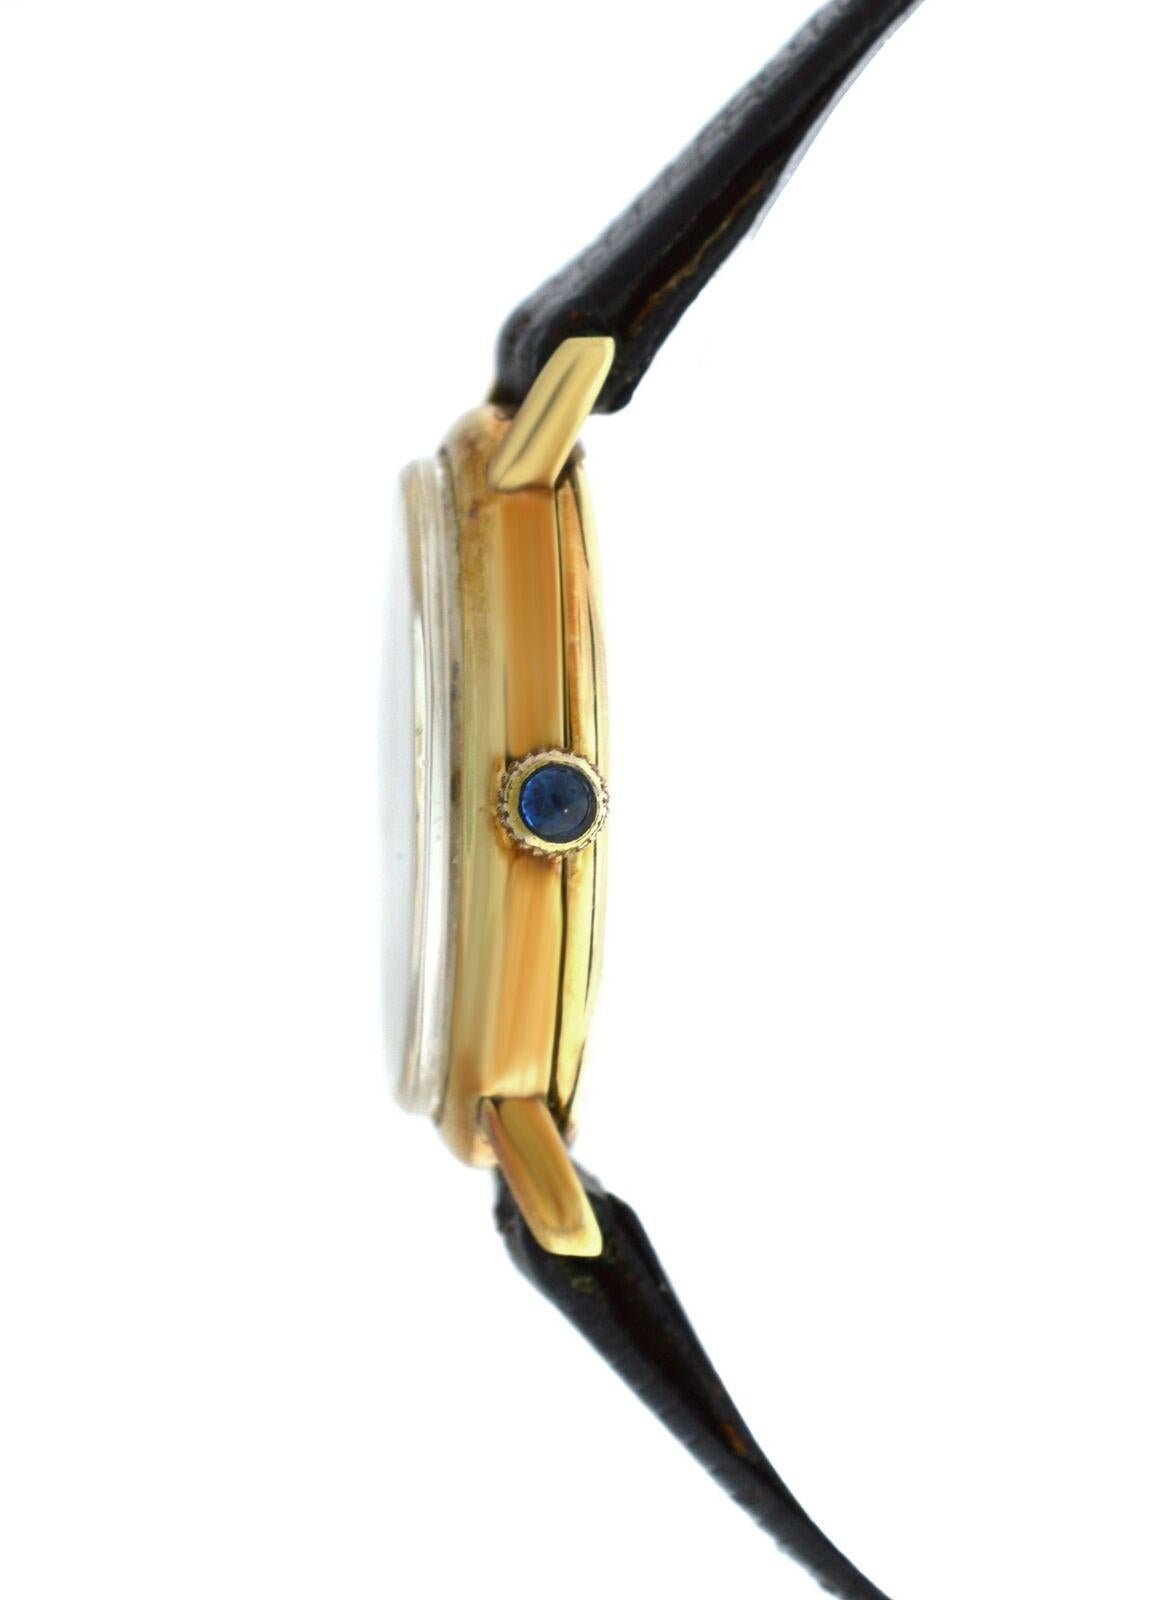 Brand	Tiffany & Co.
Model	Classic
Gender	Ladies
Condition	Pre - Owned
Movement	Swiss Mechanical
Case Material	14K Yellow Gold
Bracelet / Strap Material	Genuine Lizard
Clasp / Buckle Material	14K Yellow Gold
Clasp Type	Tang
Bracelet / Strap width	10